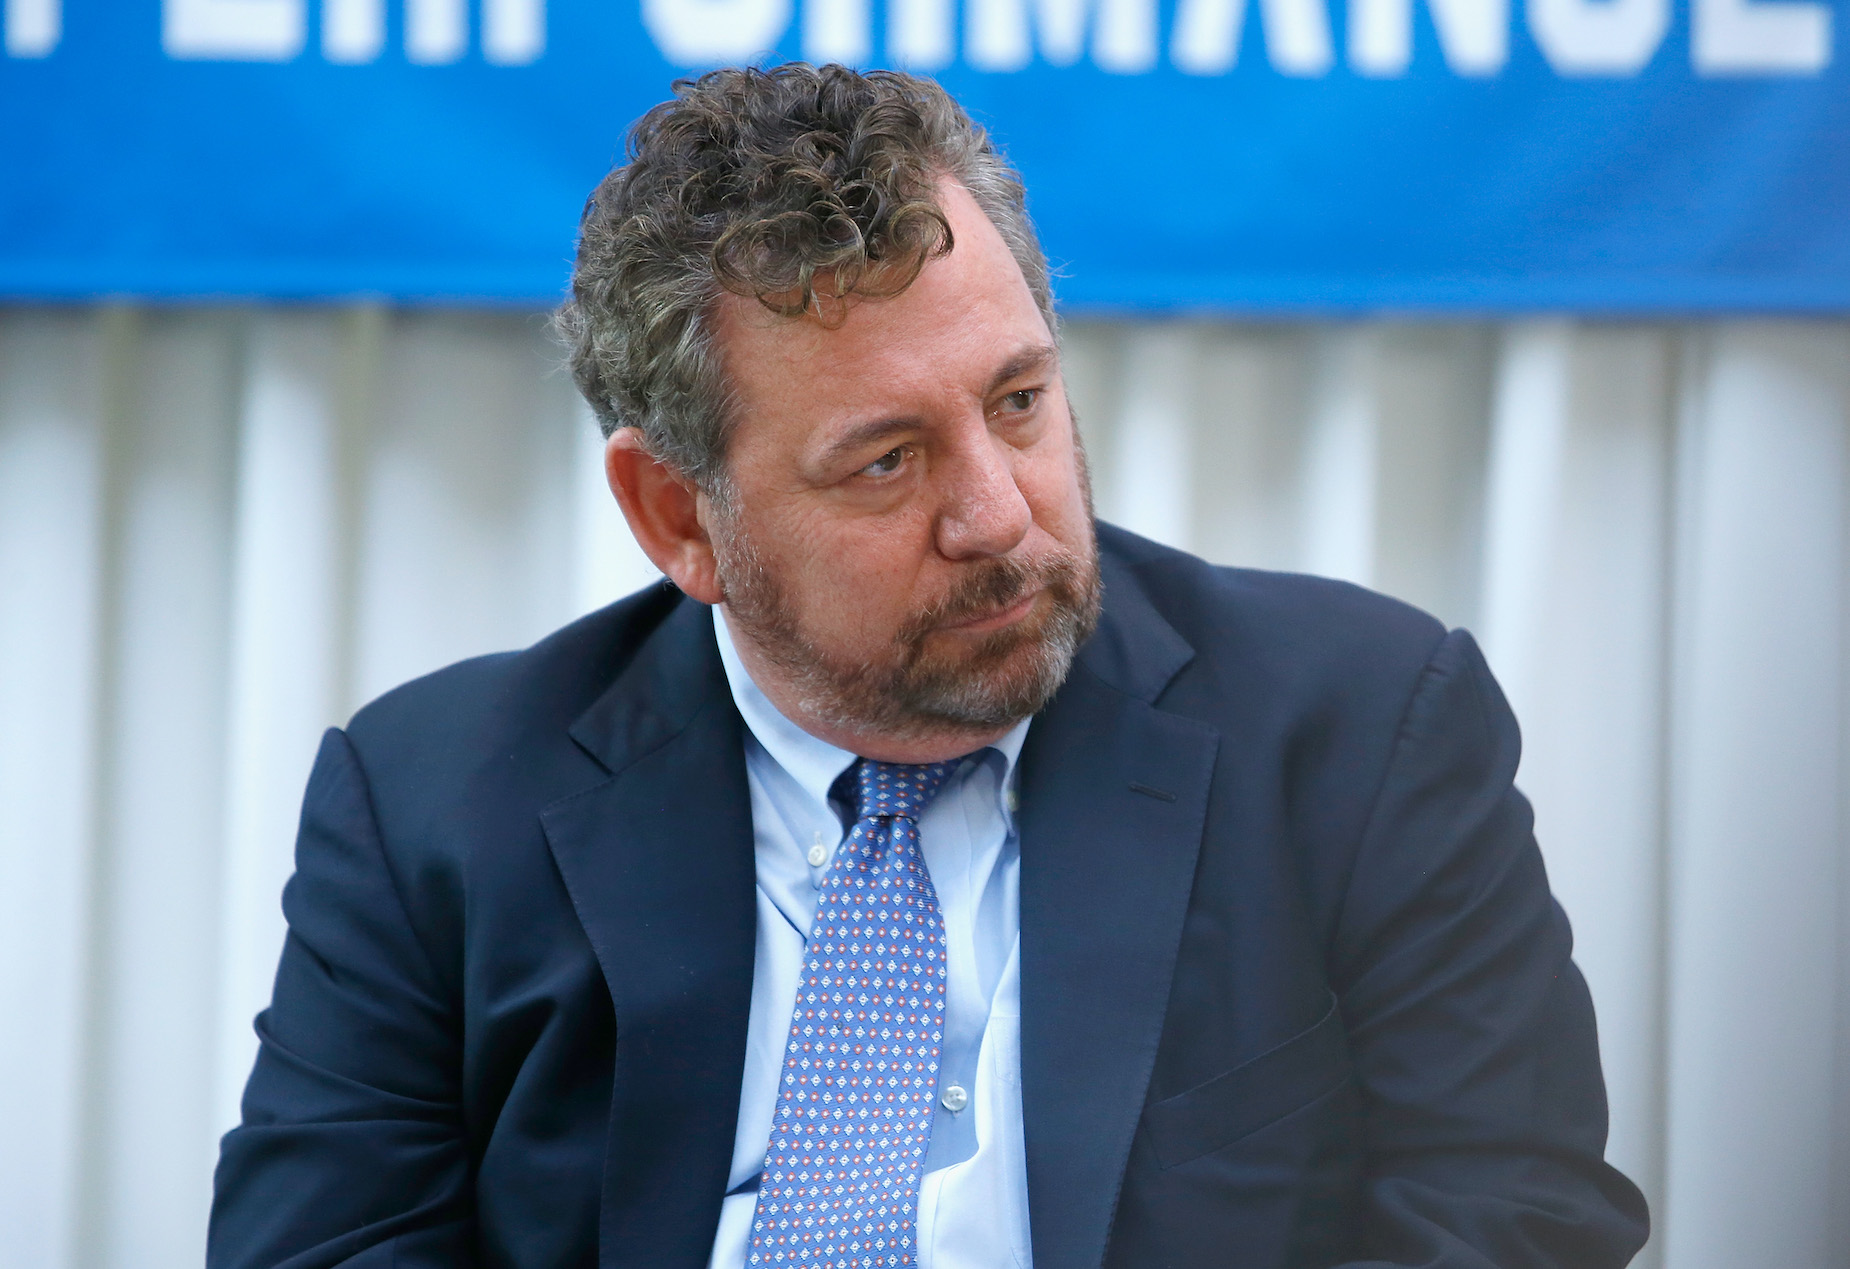 Knicks and Rangers owner James Dolan during a 2018 event honoring Billy Joel.